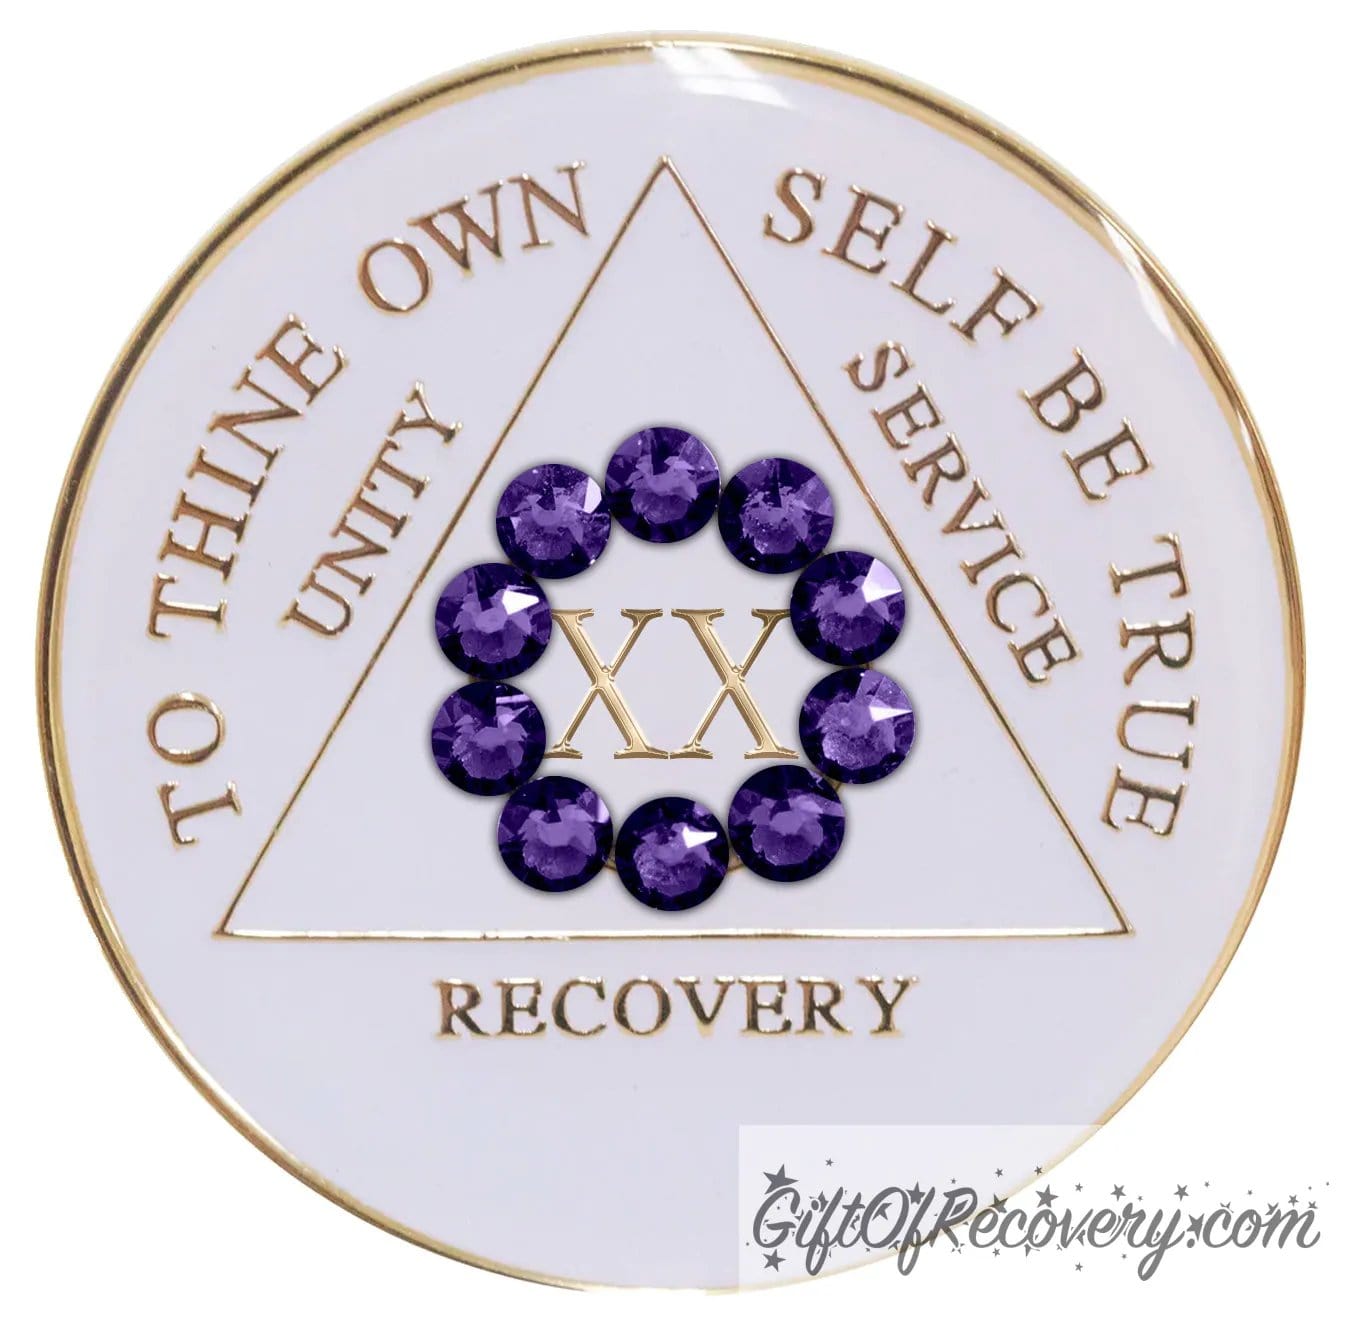 20 year AA medallion in pearl white with ten genuine purple velvet crystal in a circle representing our common welfare and personal recovery, to thine own self be true and other AA moto embossed with 14k gold-plated brass, the recovery medallion is sealed with resin for a scratch free shiny finish.